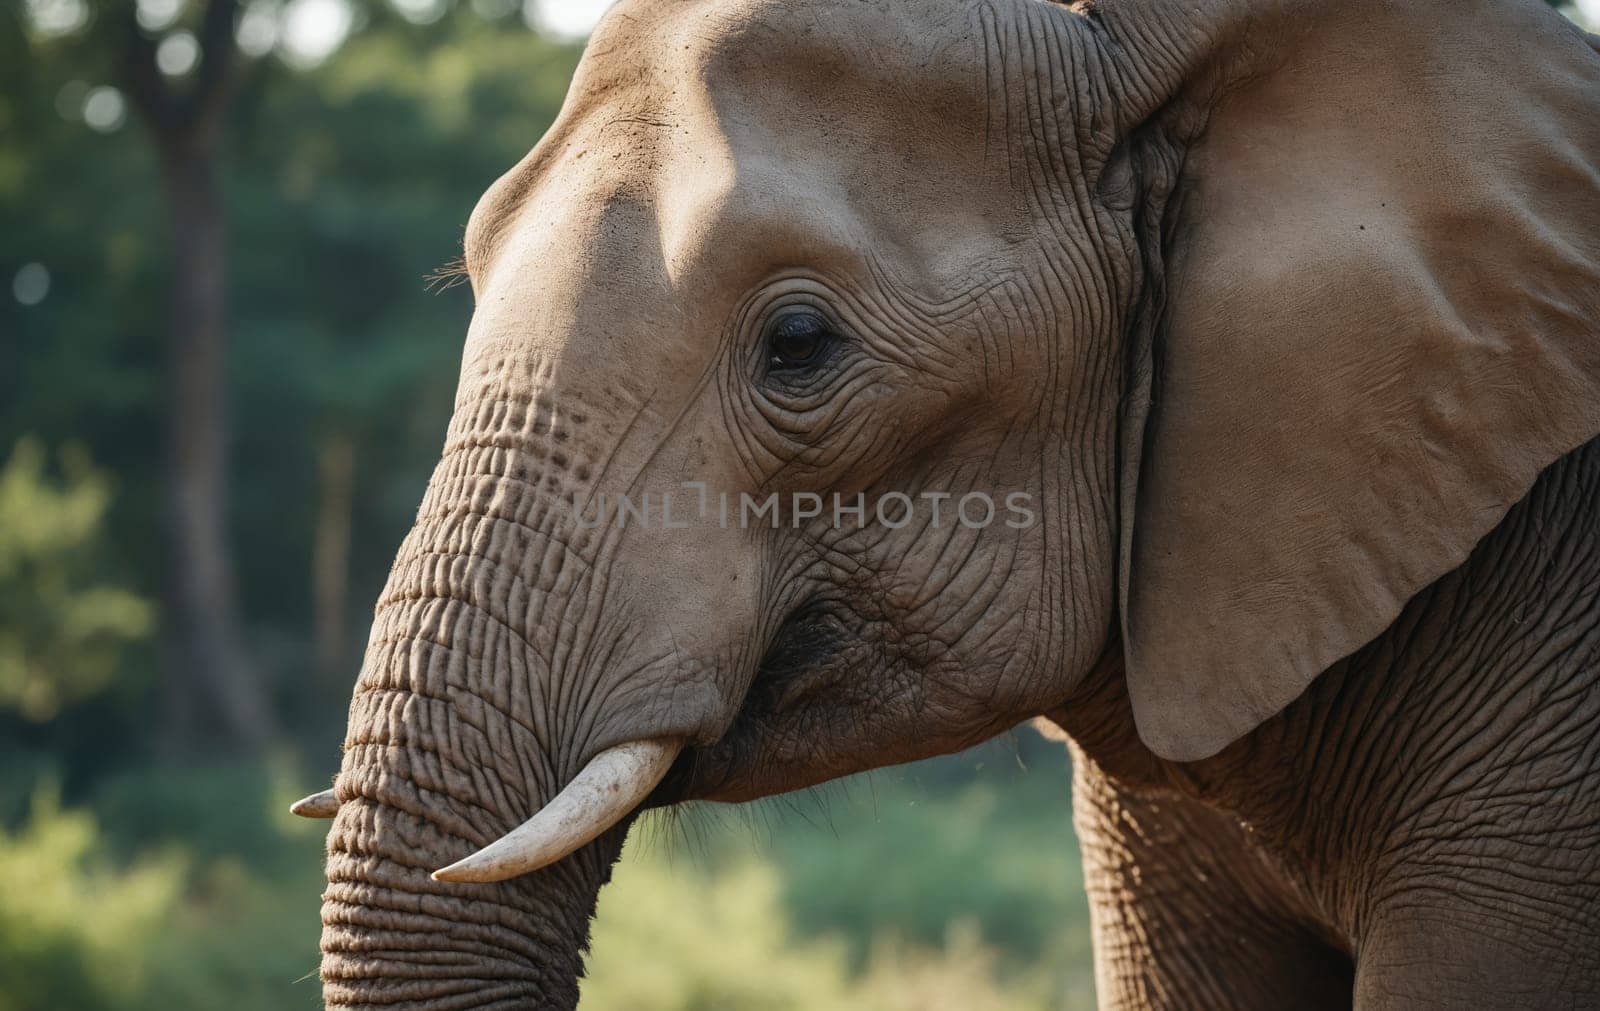 Close up of an Indian elephants face with wrinkles and a long trunk, surrounded by trees and grass. A majestic terrestrial animal, known for being a working animal